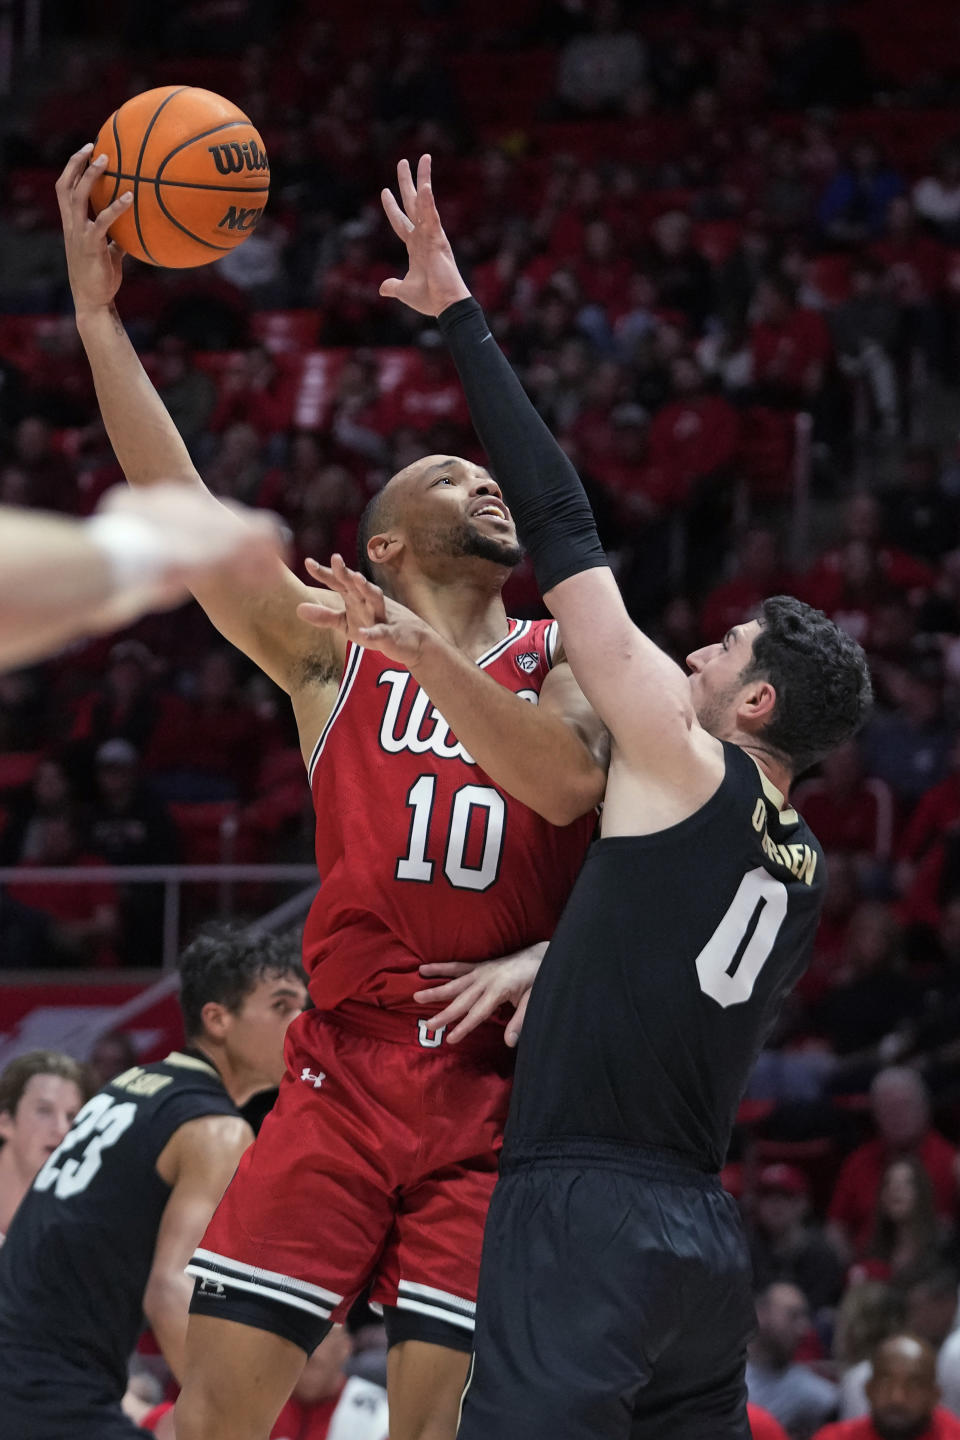 Utah guard Marco Anthony (10) shoots as Colorado guard Luke O'Brien (0) defends during the second half of an NCAA college basketball game Saturday, Feb. 11, 2023, in Salt Lake City. (AP Photo/Rick Bowmer)